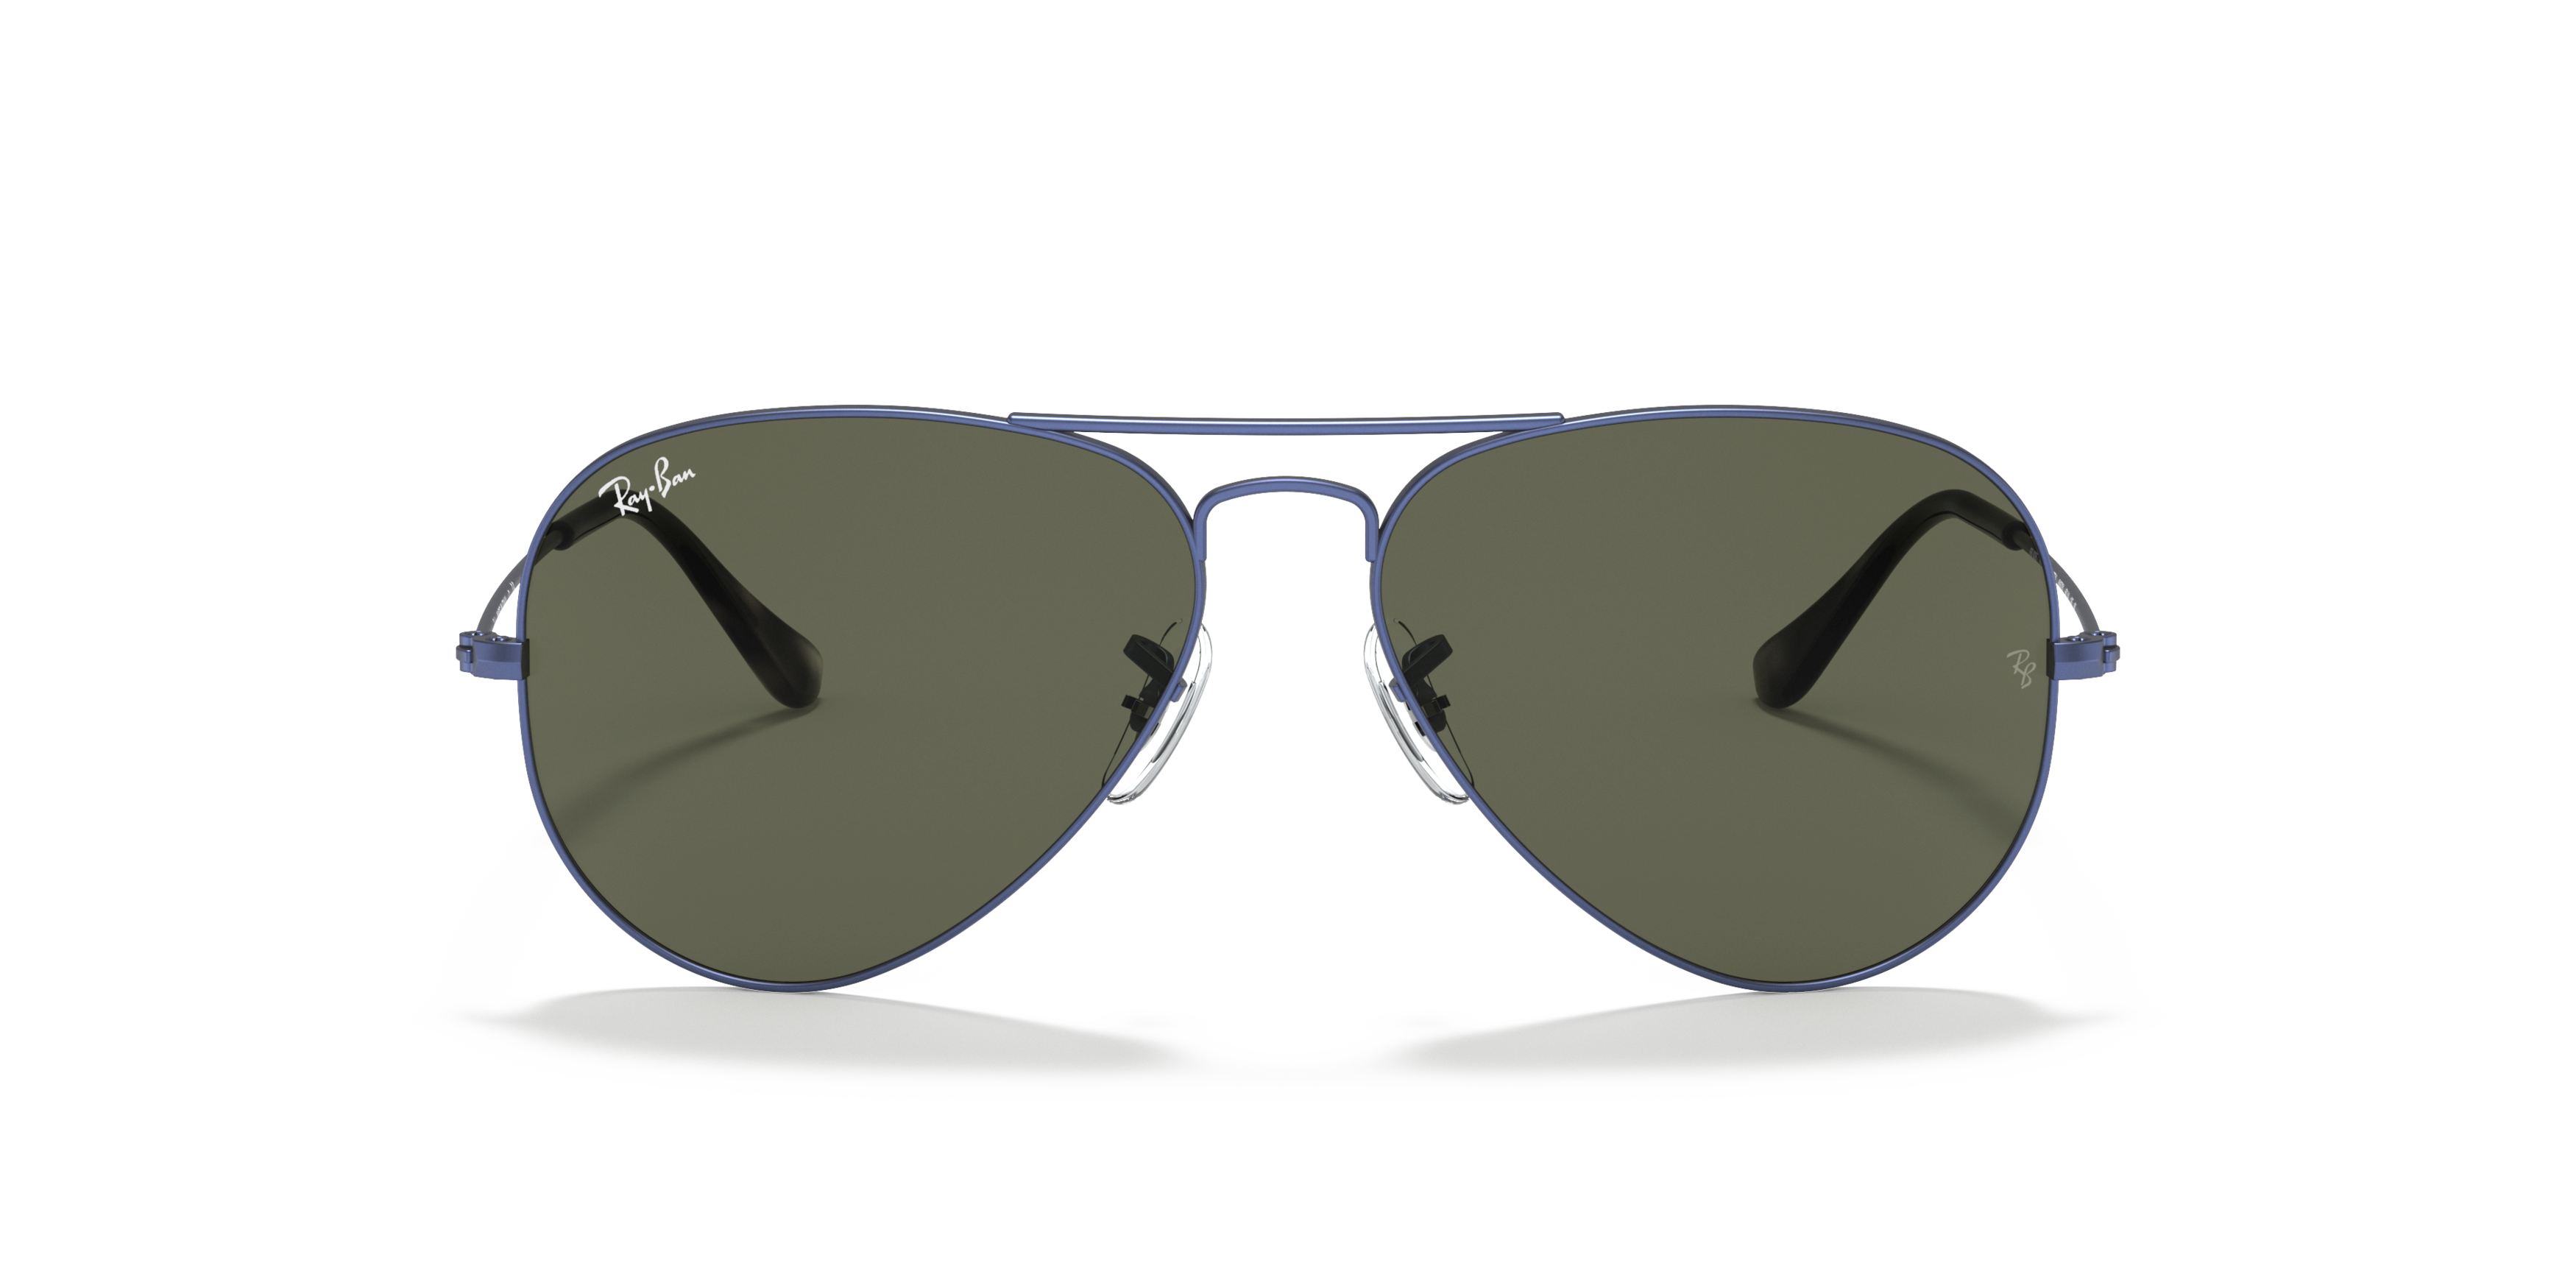 [products.image.front] Ray-Ban Aviator RB3025 918731